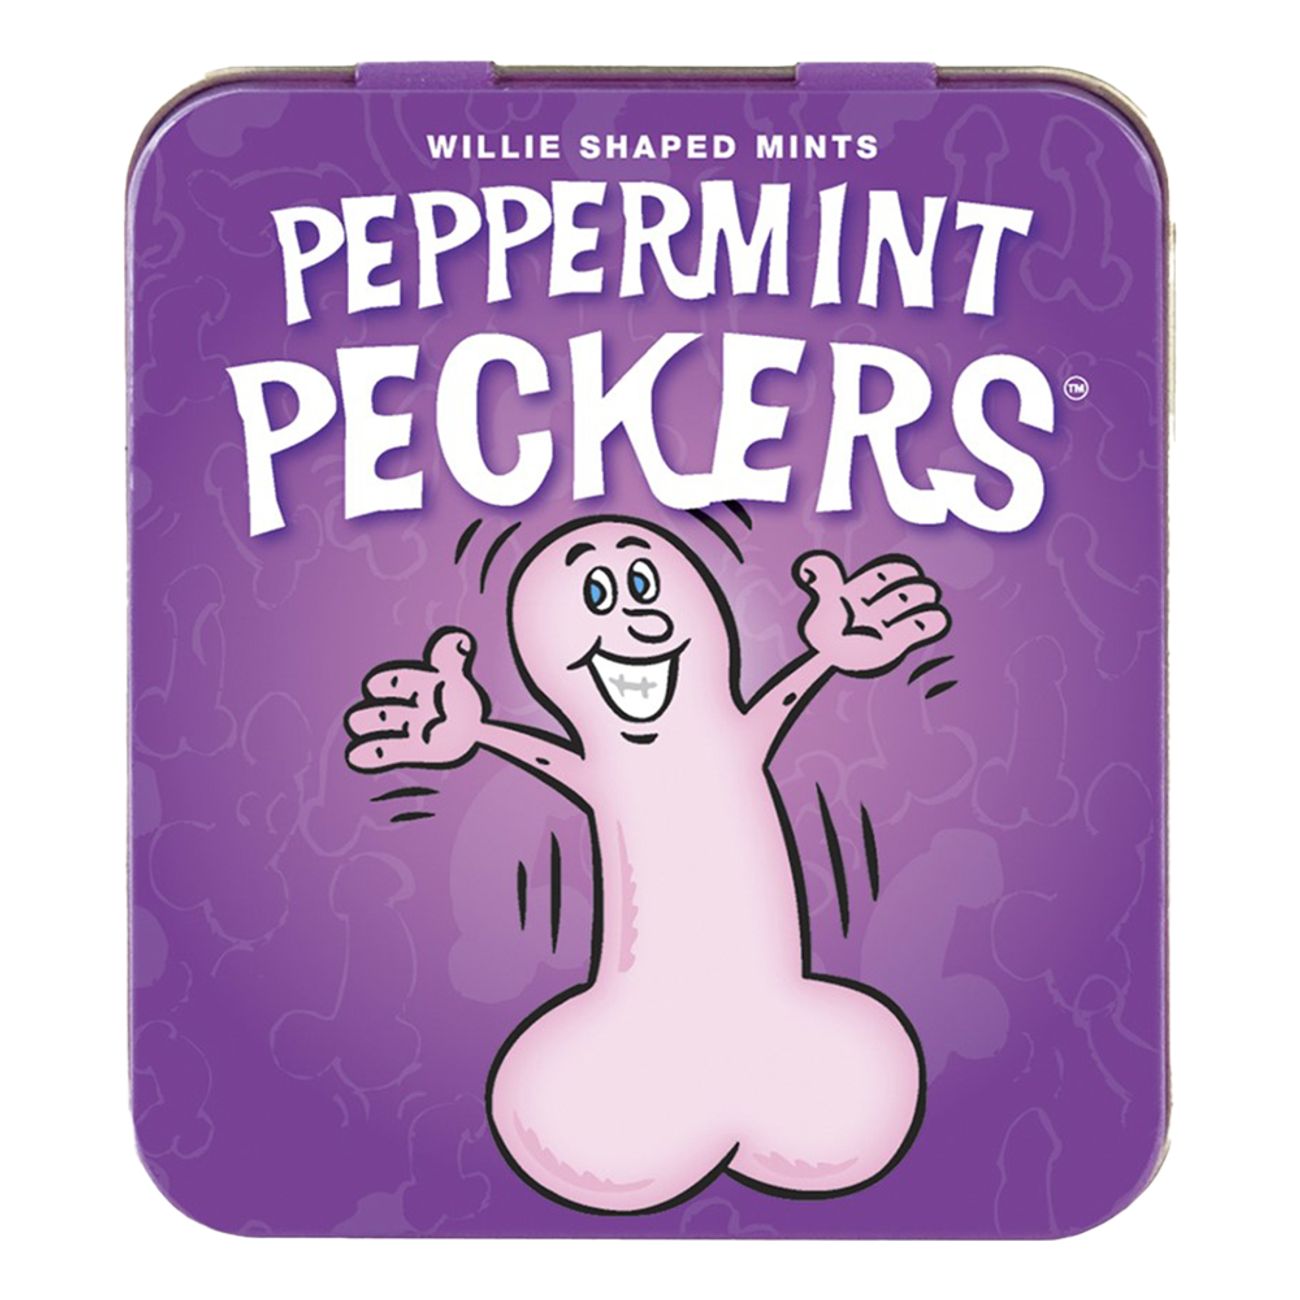 peppermint-peckers-86674-1